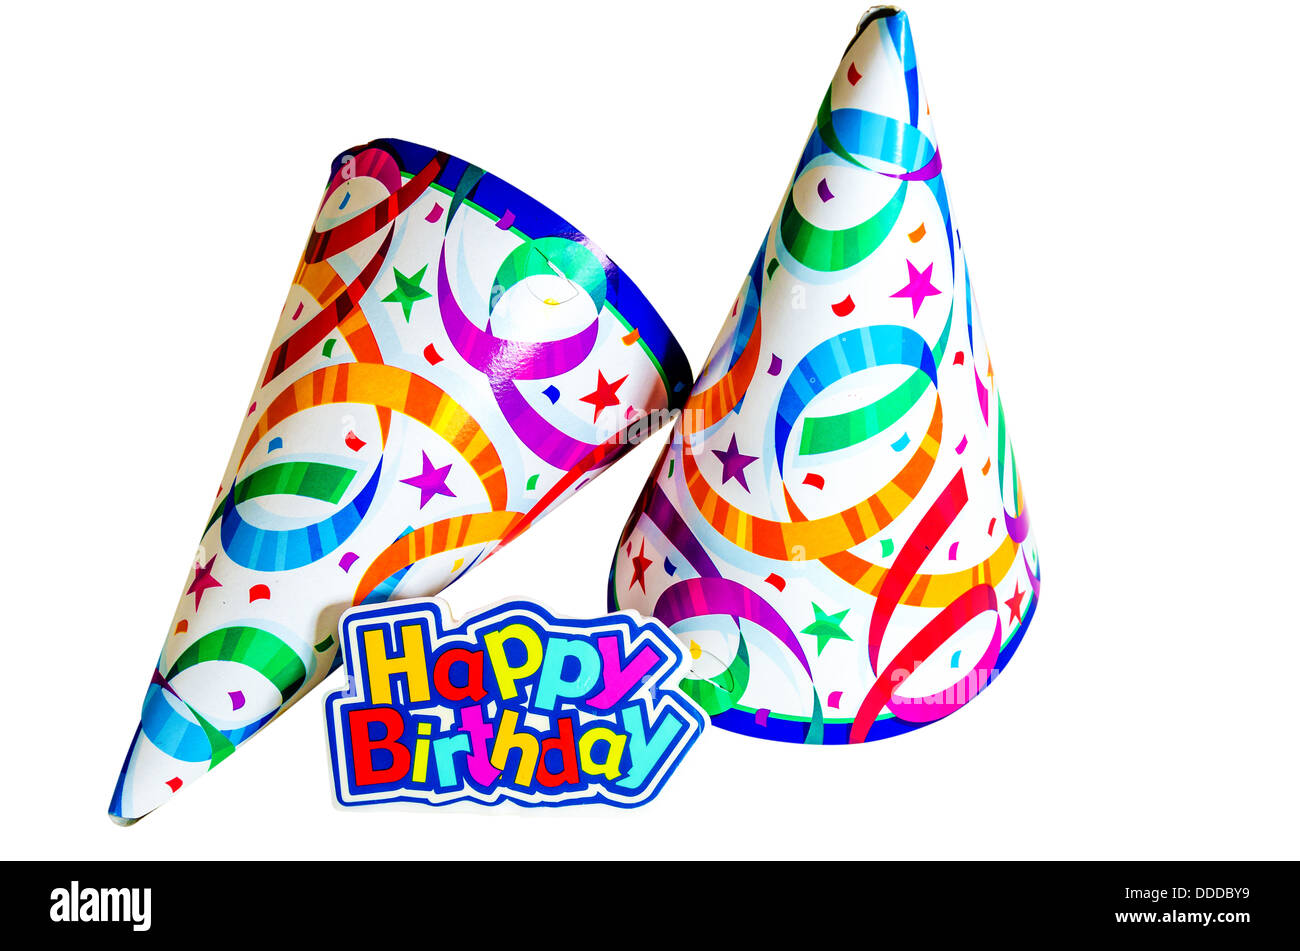 Happy birthday with hats isolated on white background with clipping path. Stock Photo